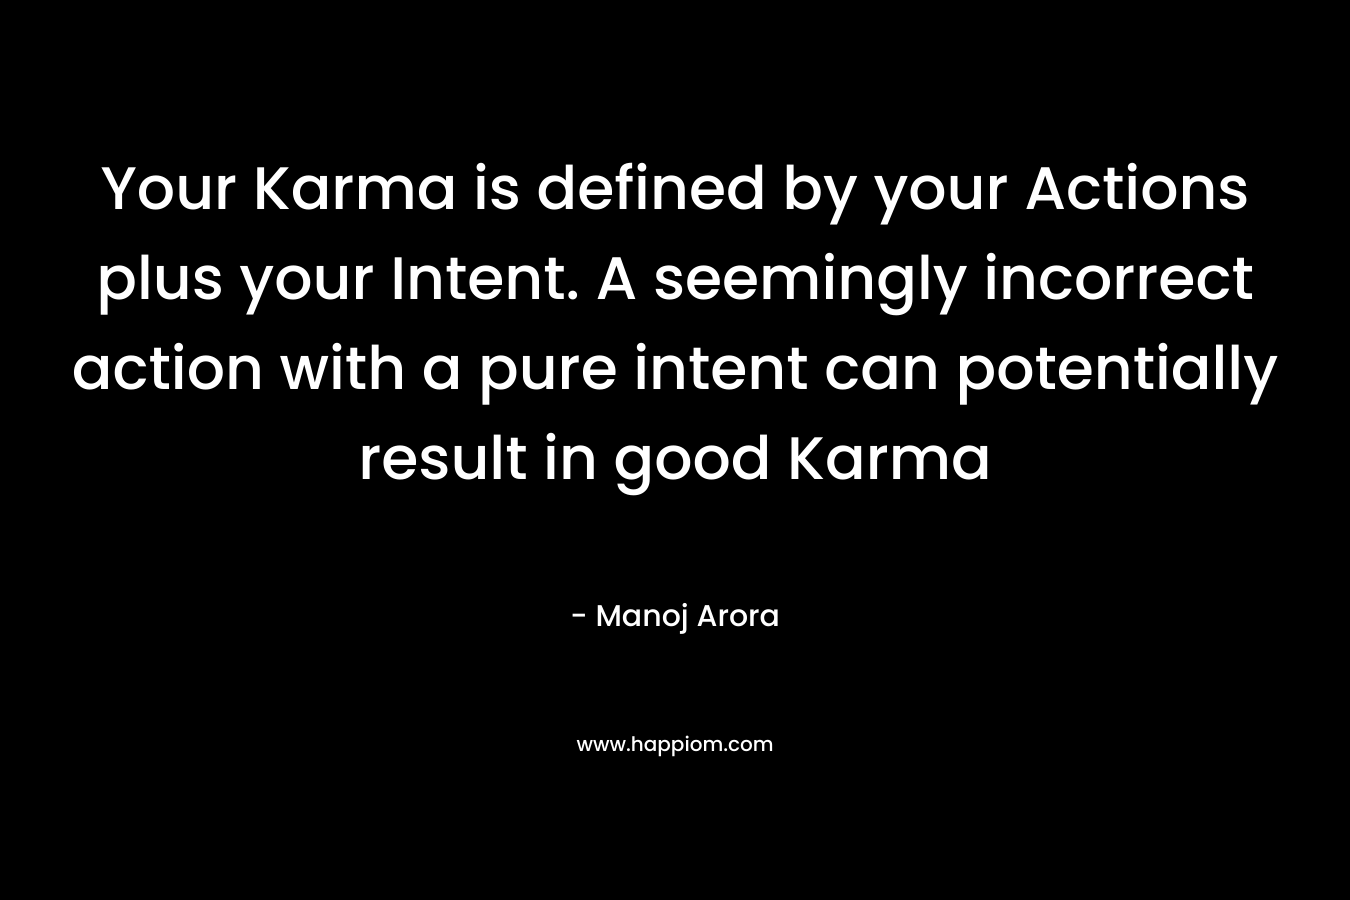 Your Karma is defined by your Actions plus your Intent. A seemingly incorrect action with a pure intent can potentially result in good Karma